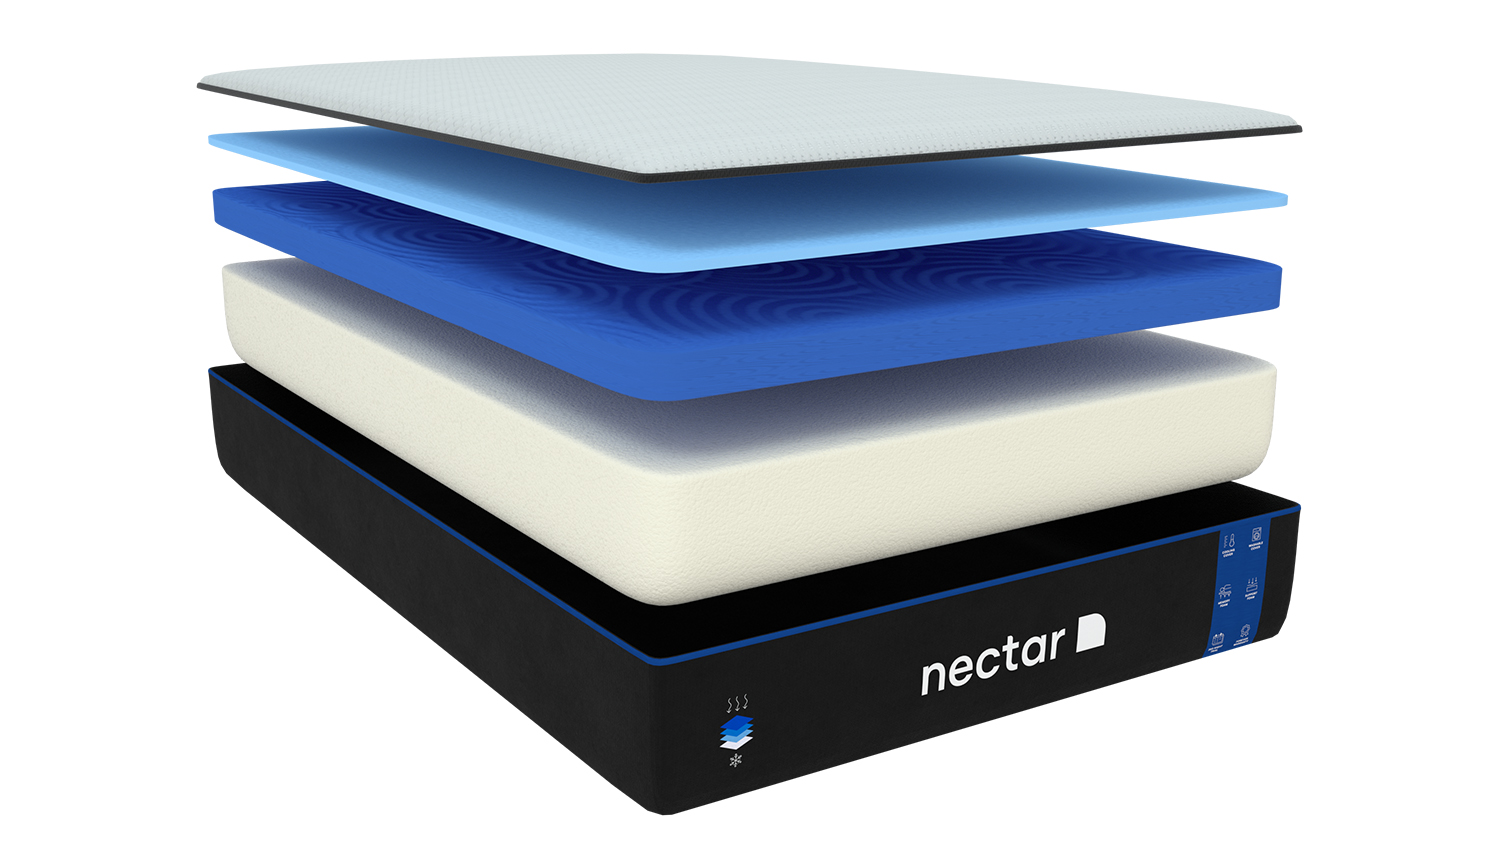 Image shows inside the Nectar Mattress so that you can see each of the five different layers